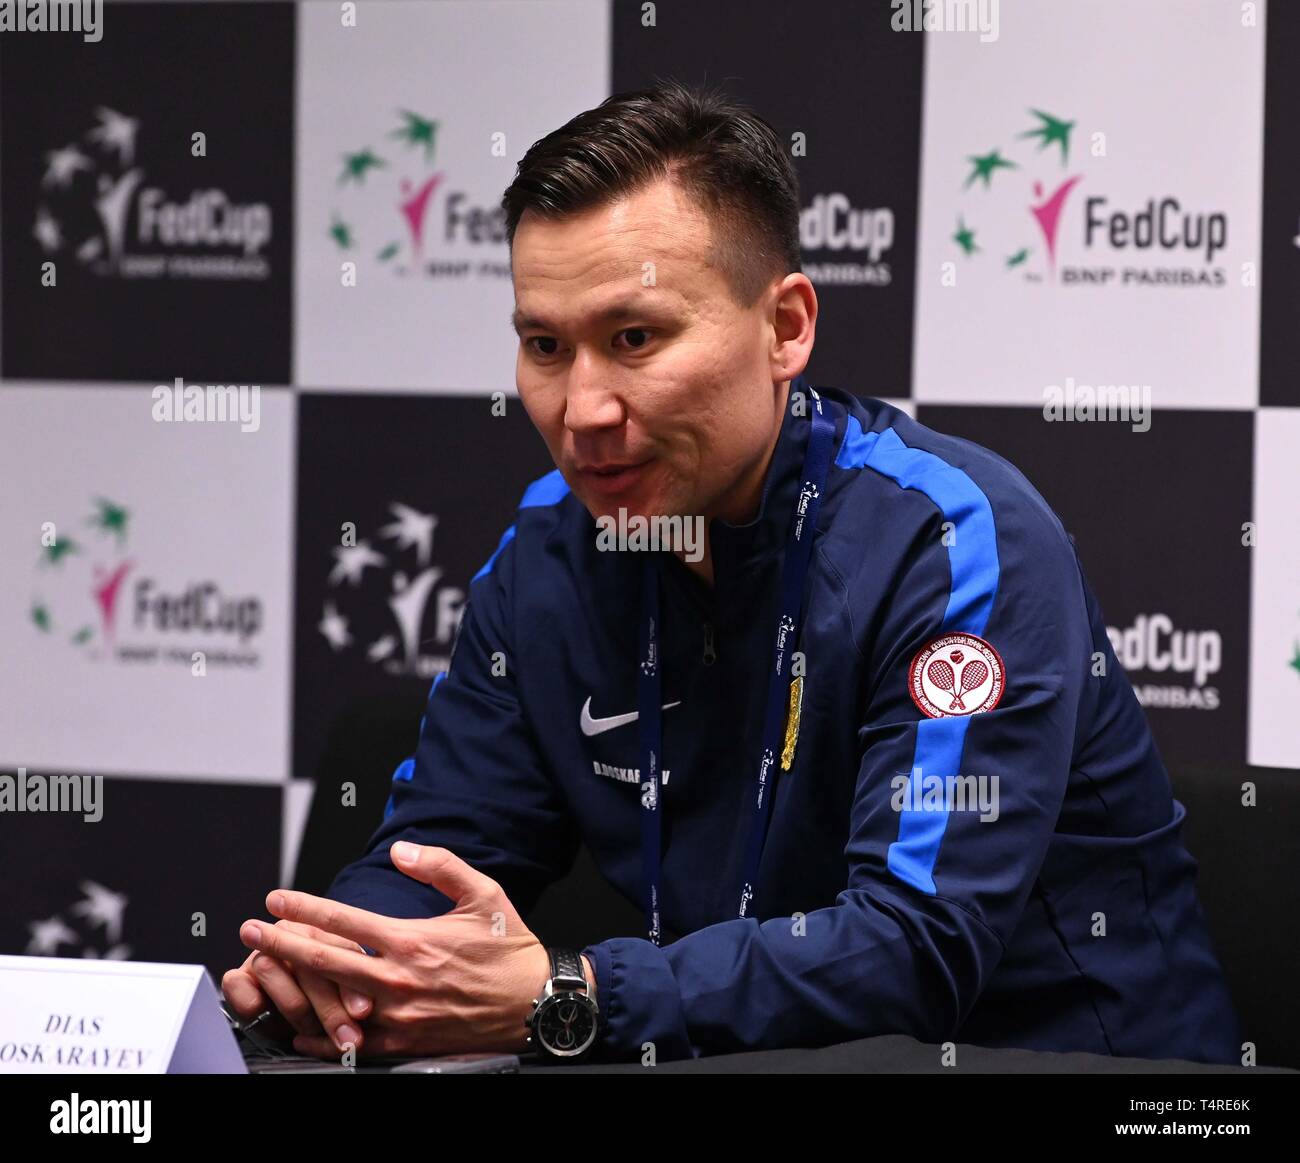 Dias Doskarayev (Captain of the Kazakhstan team). Kazakhstan Captains press conference ahead of the World group II play off in the BNP Paribas Fed Cup. Copper Box Arena. Queen Elizabeth Olympic Park. Stratford. London. UK. 18/04/2019. Credit: Sport In Pictures/Alamy Live News Stock Photo